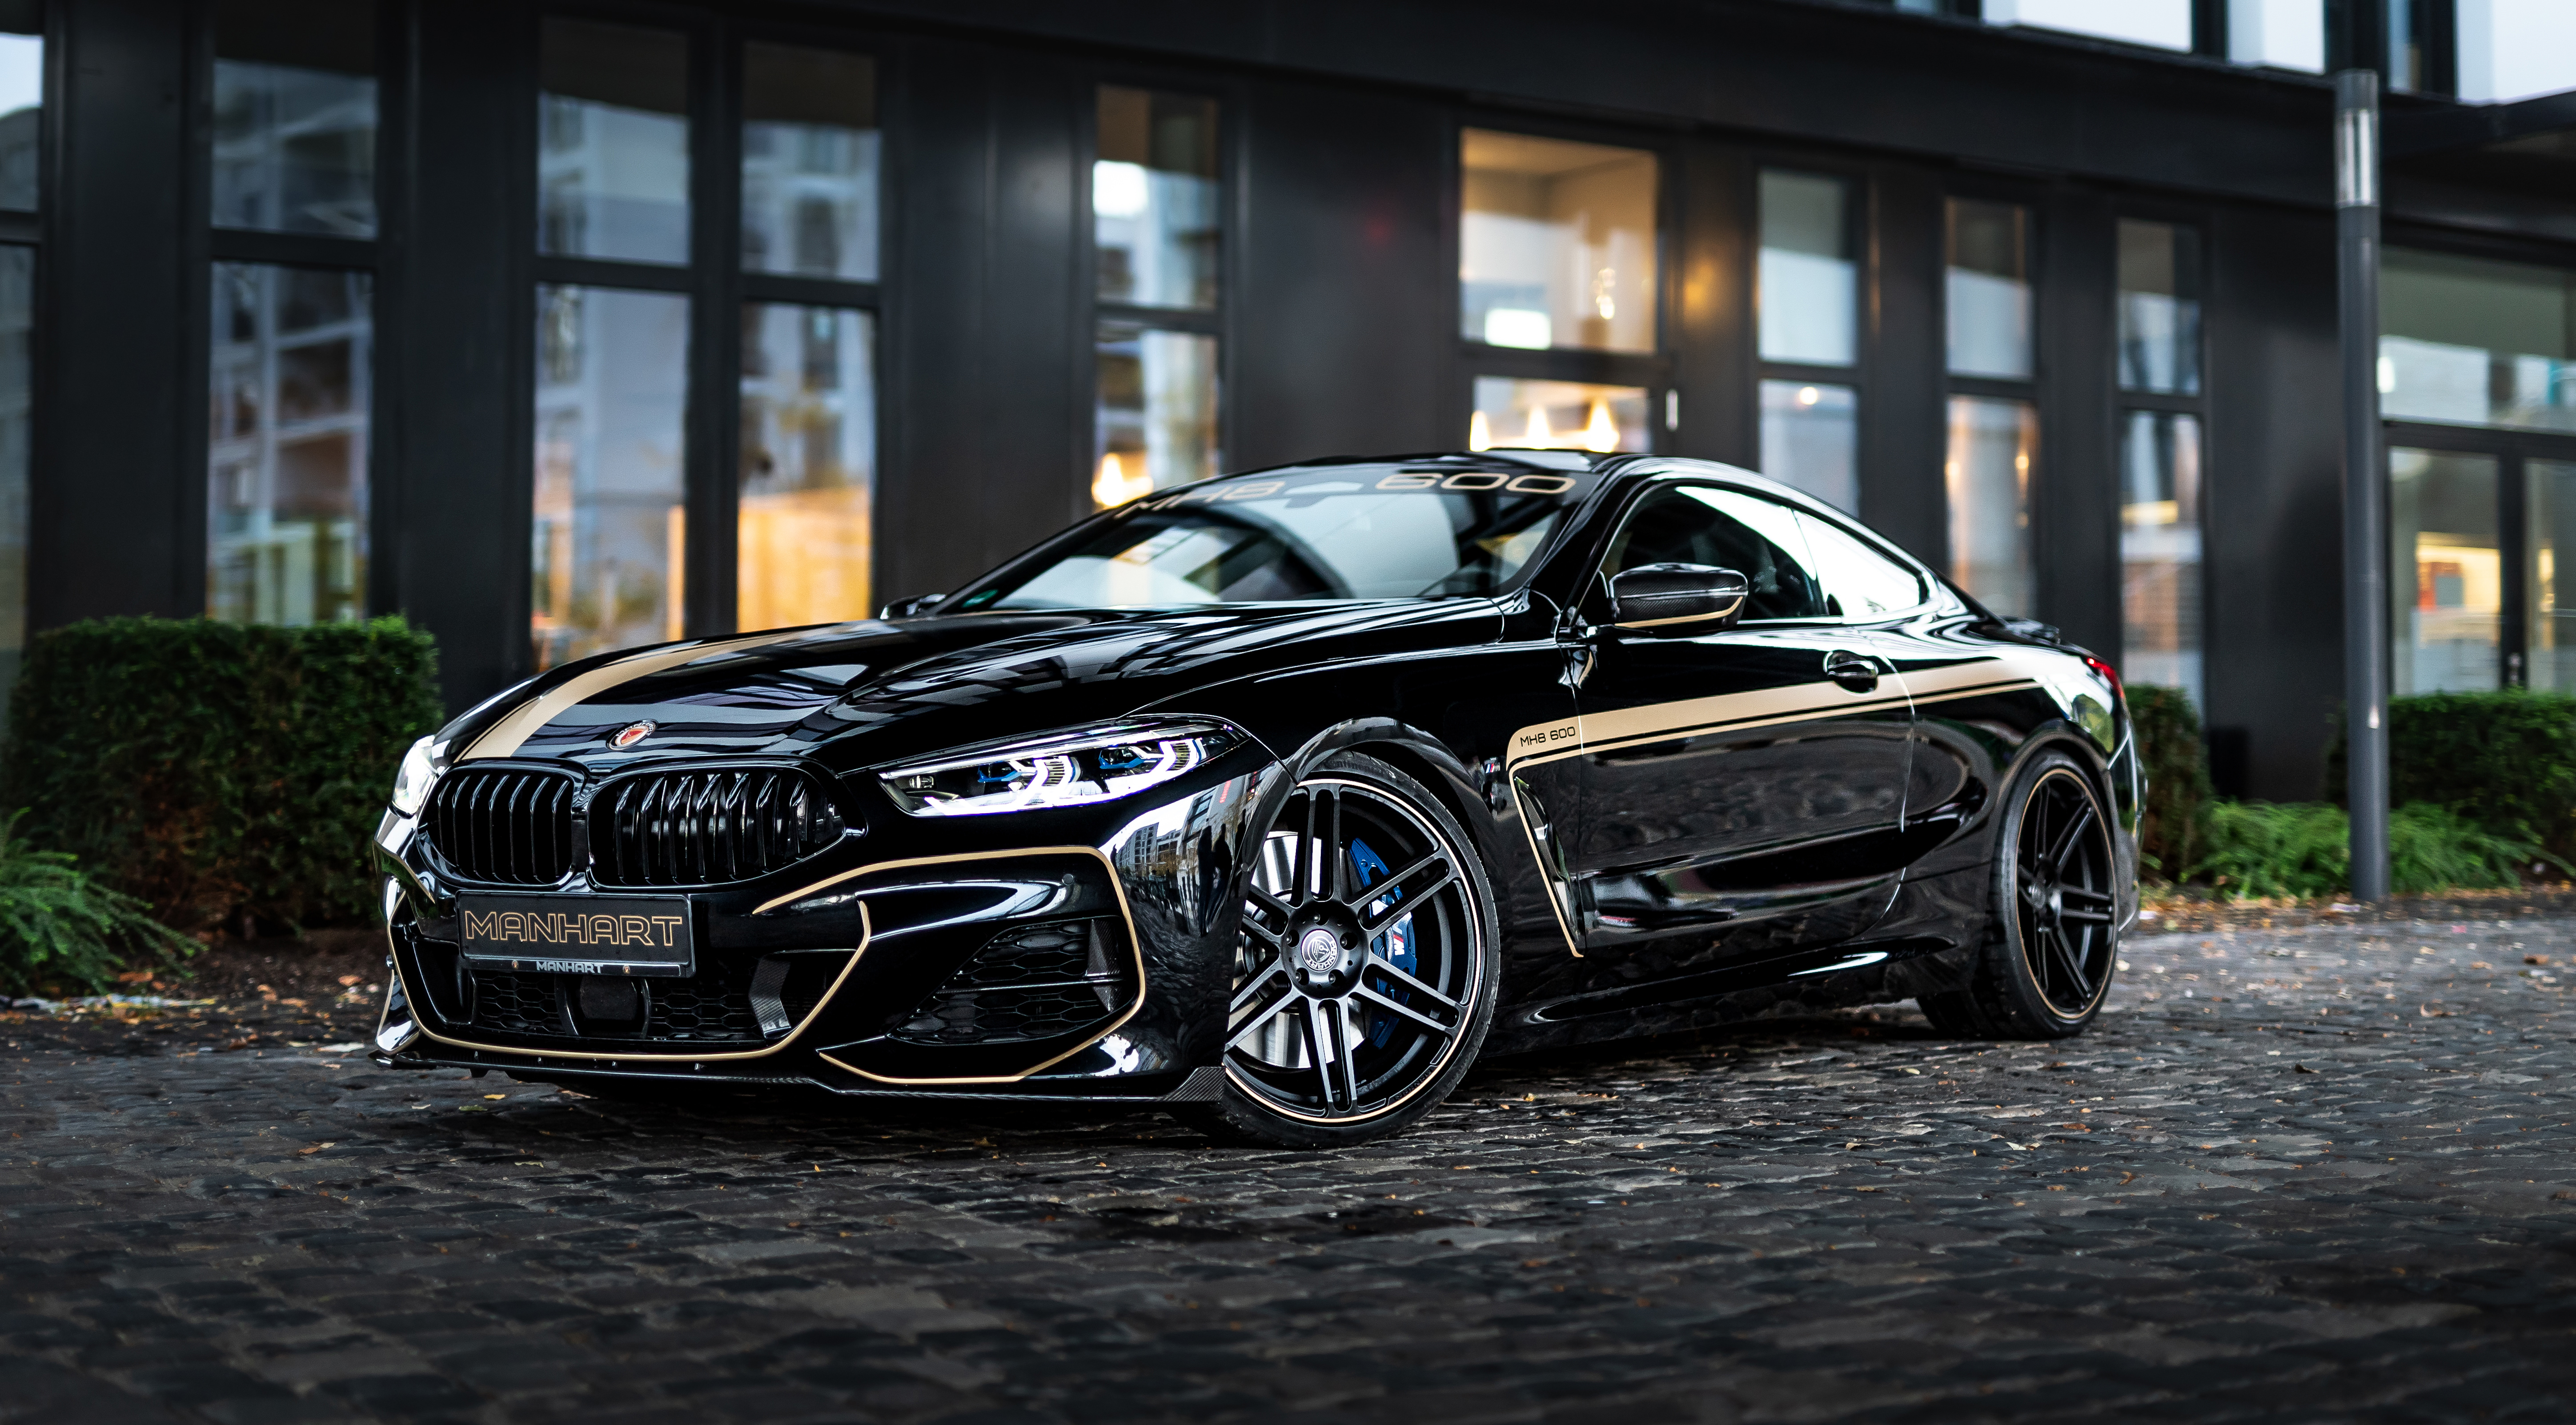 🔥 #bmw individual m850i xdrive night sky 2019 4k wallpaper. hd - android /  iphone hd wallpaper background download HD Photos & Wallpapers (0+ Images)  - Page: 1